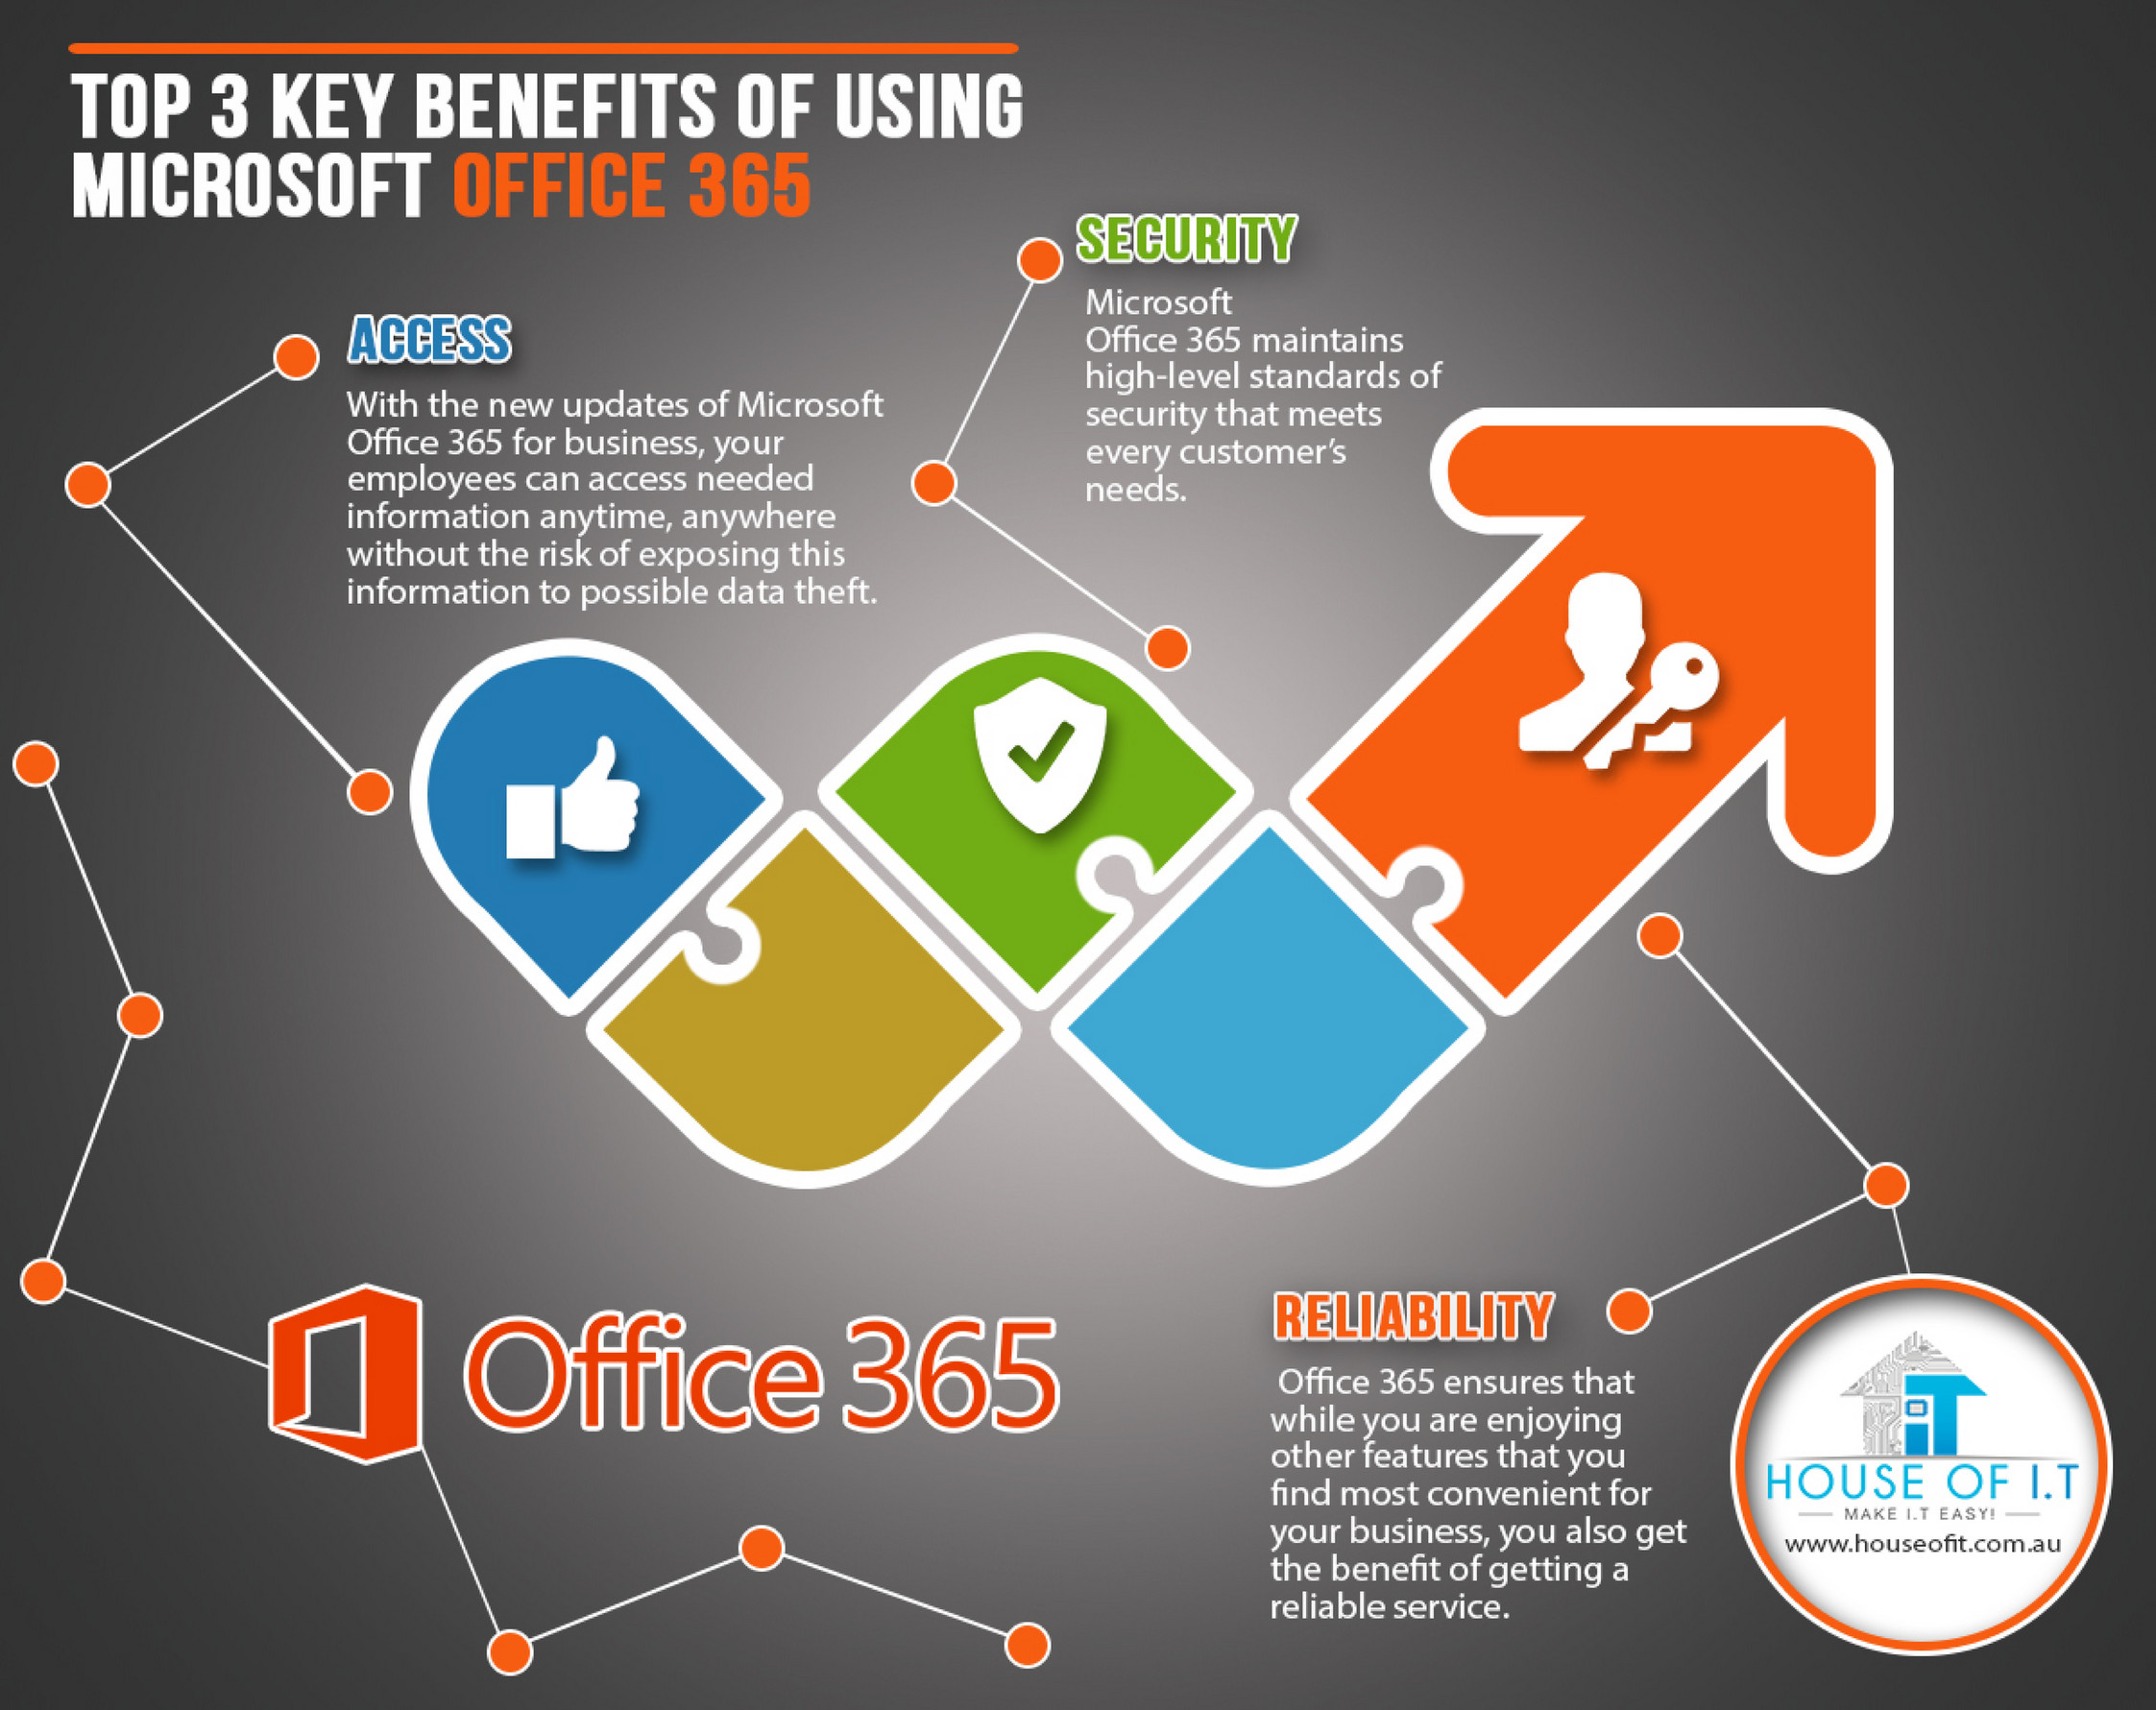 My publications - Top 3 Key Benefits of Using Microsoft Office 365 - Page 1  - Created with 